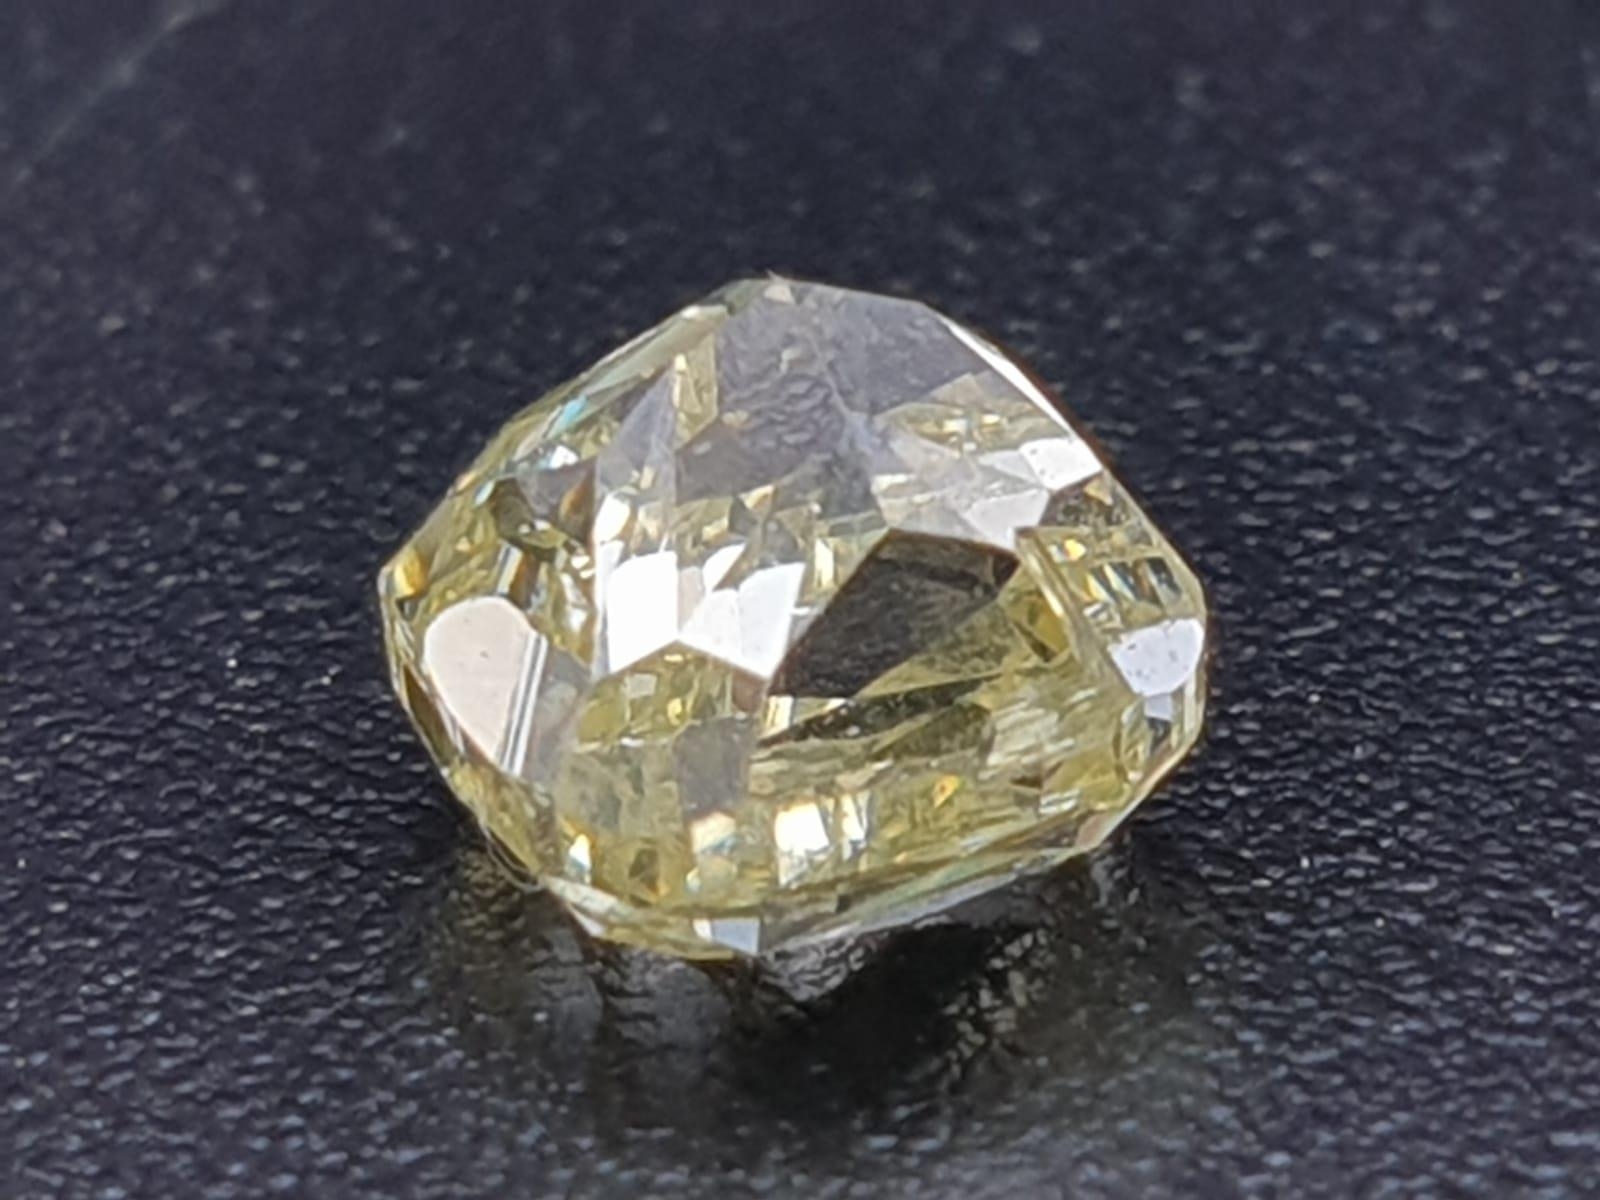 LOOSE DIAMOND CUSHION MODIFIED BRILIANT GIA 2135500807 1CT NATURAL FANCY YELLOW EVEN DISTRIBUTION - Image 4 of 6